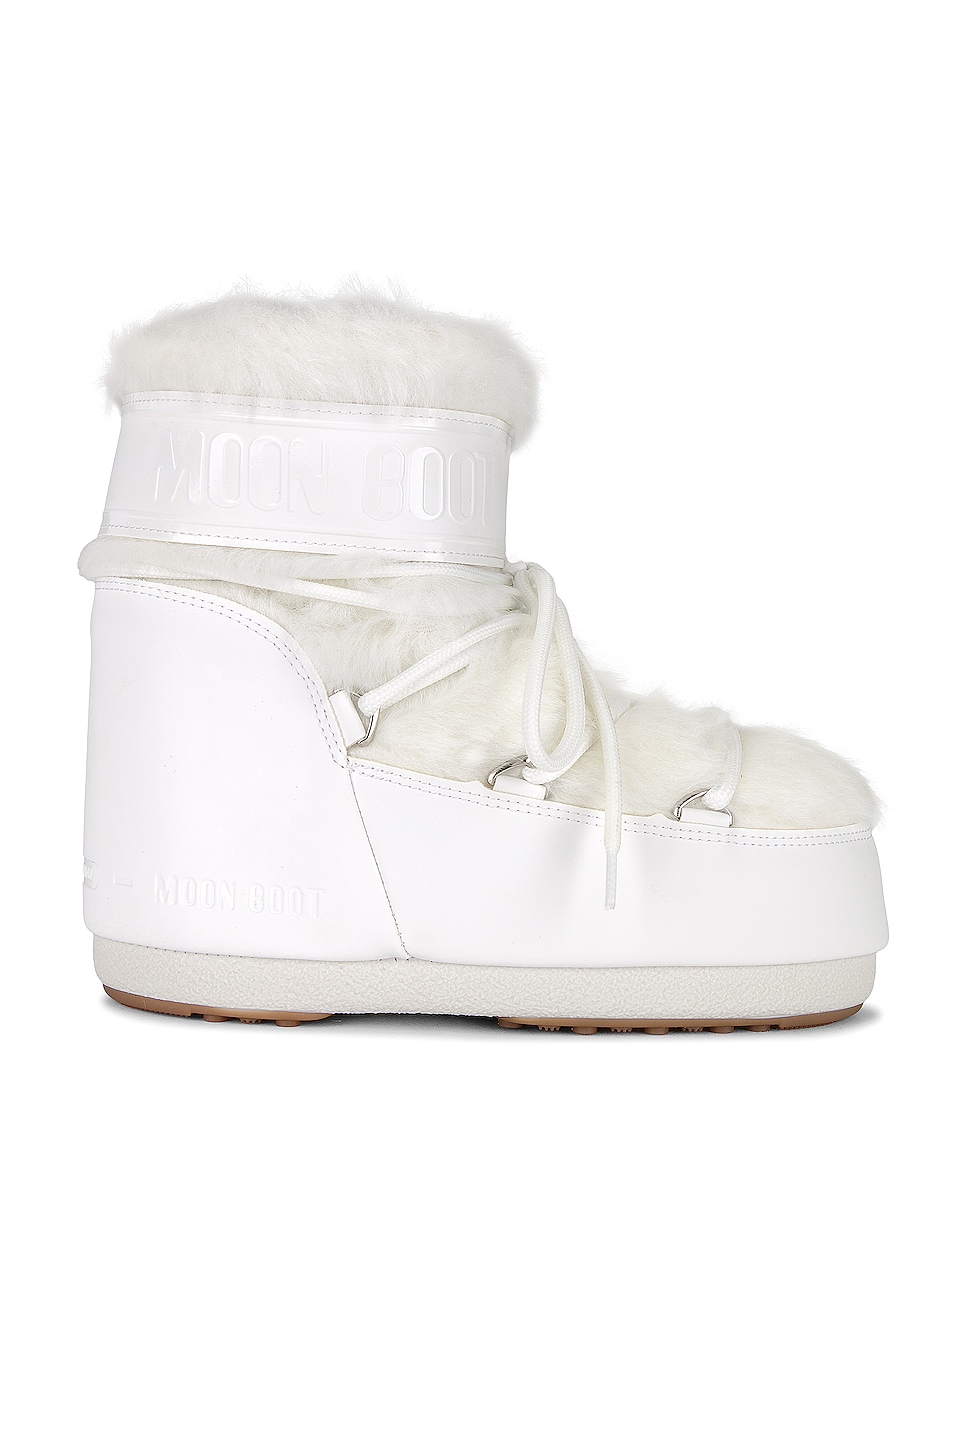 MOON BOOT in Optical White in Optical White | REVOLVE